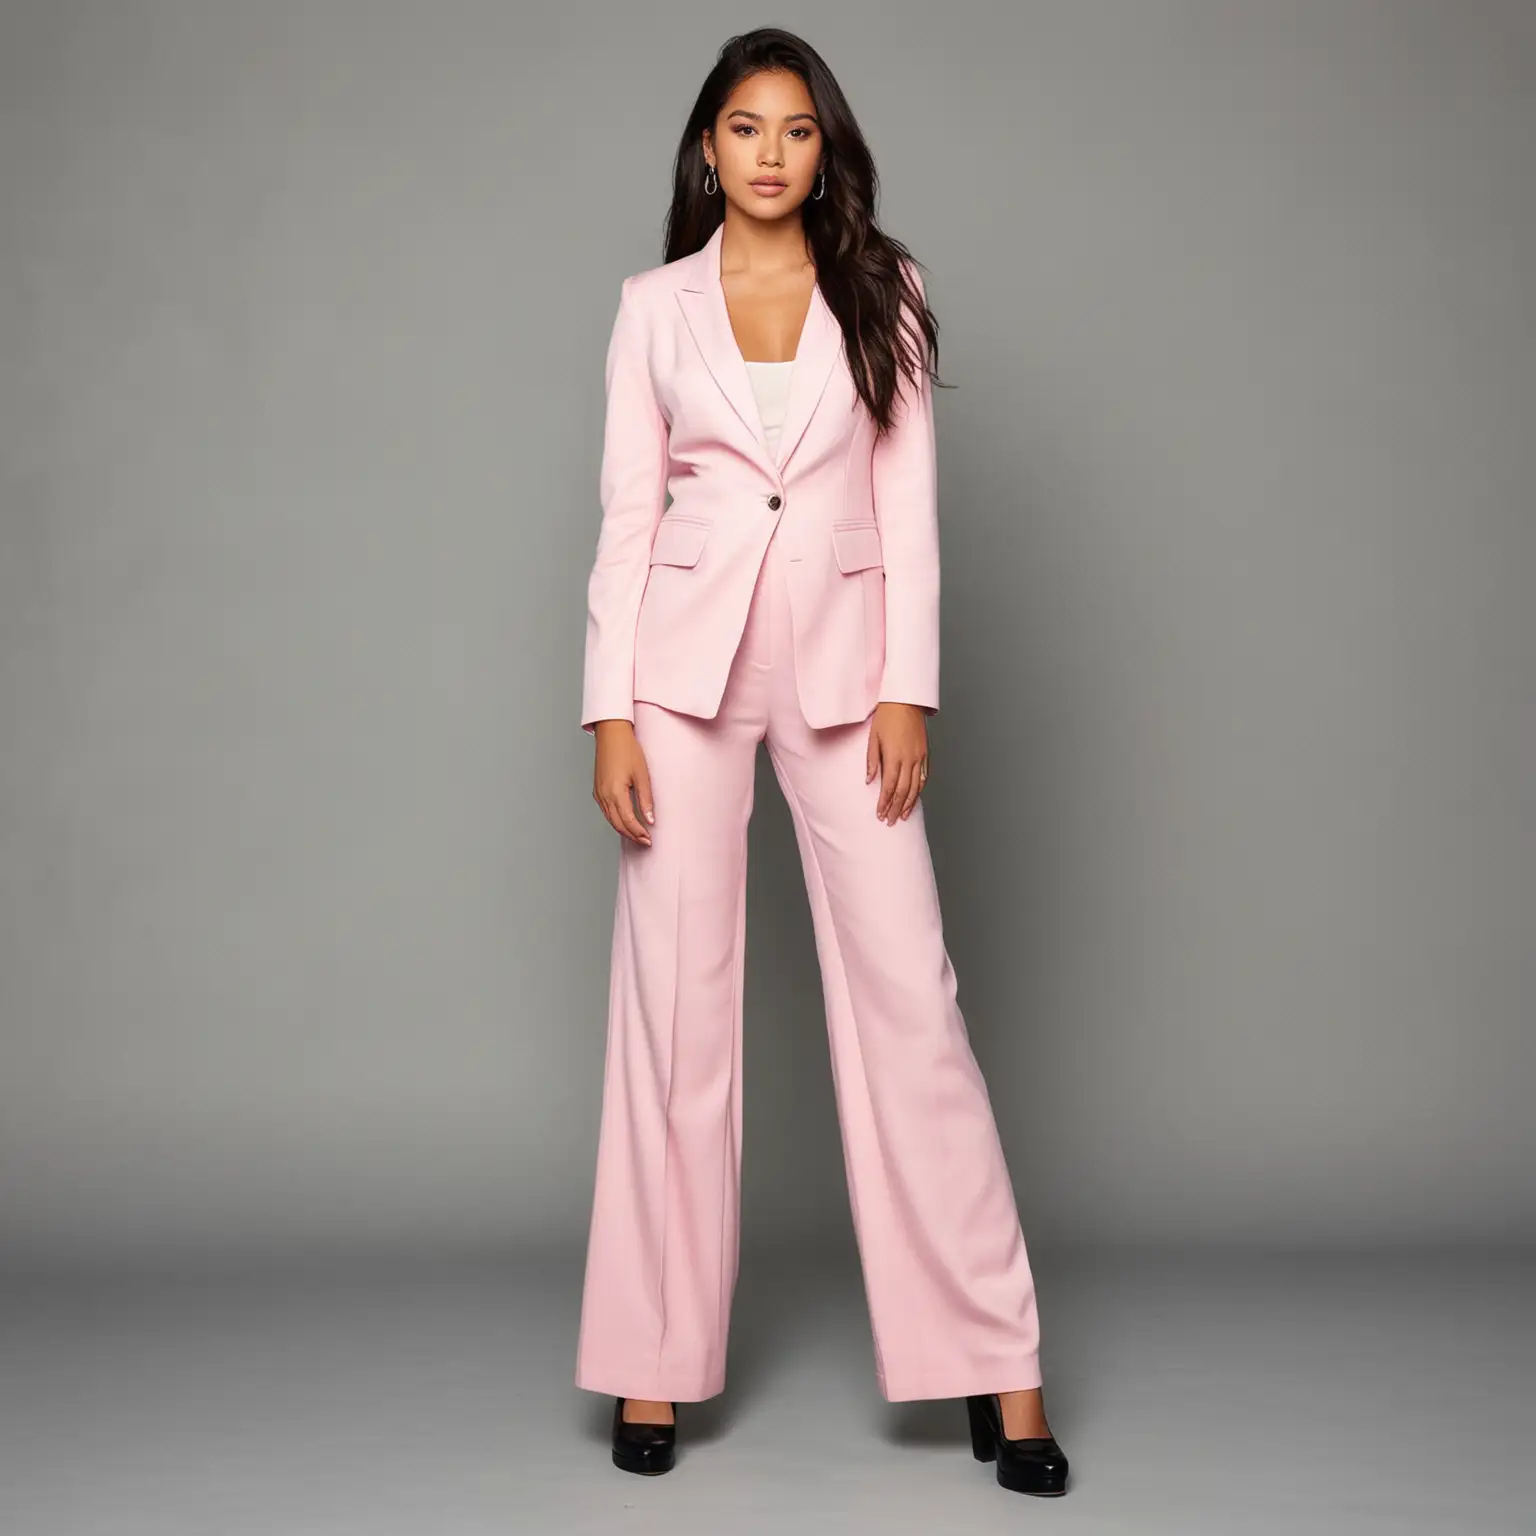 latina teenage girl in a wide leg pant suit with platforms loafers or pumps for an interview.  should look like  a teenager